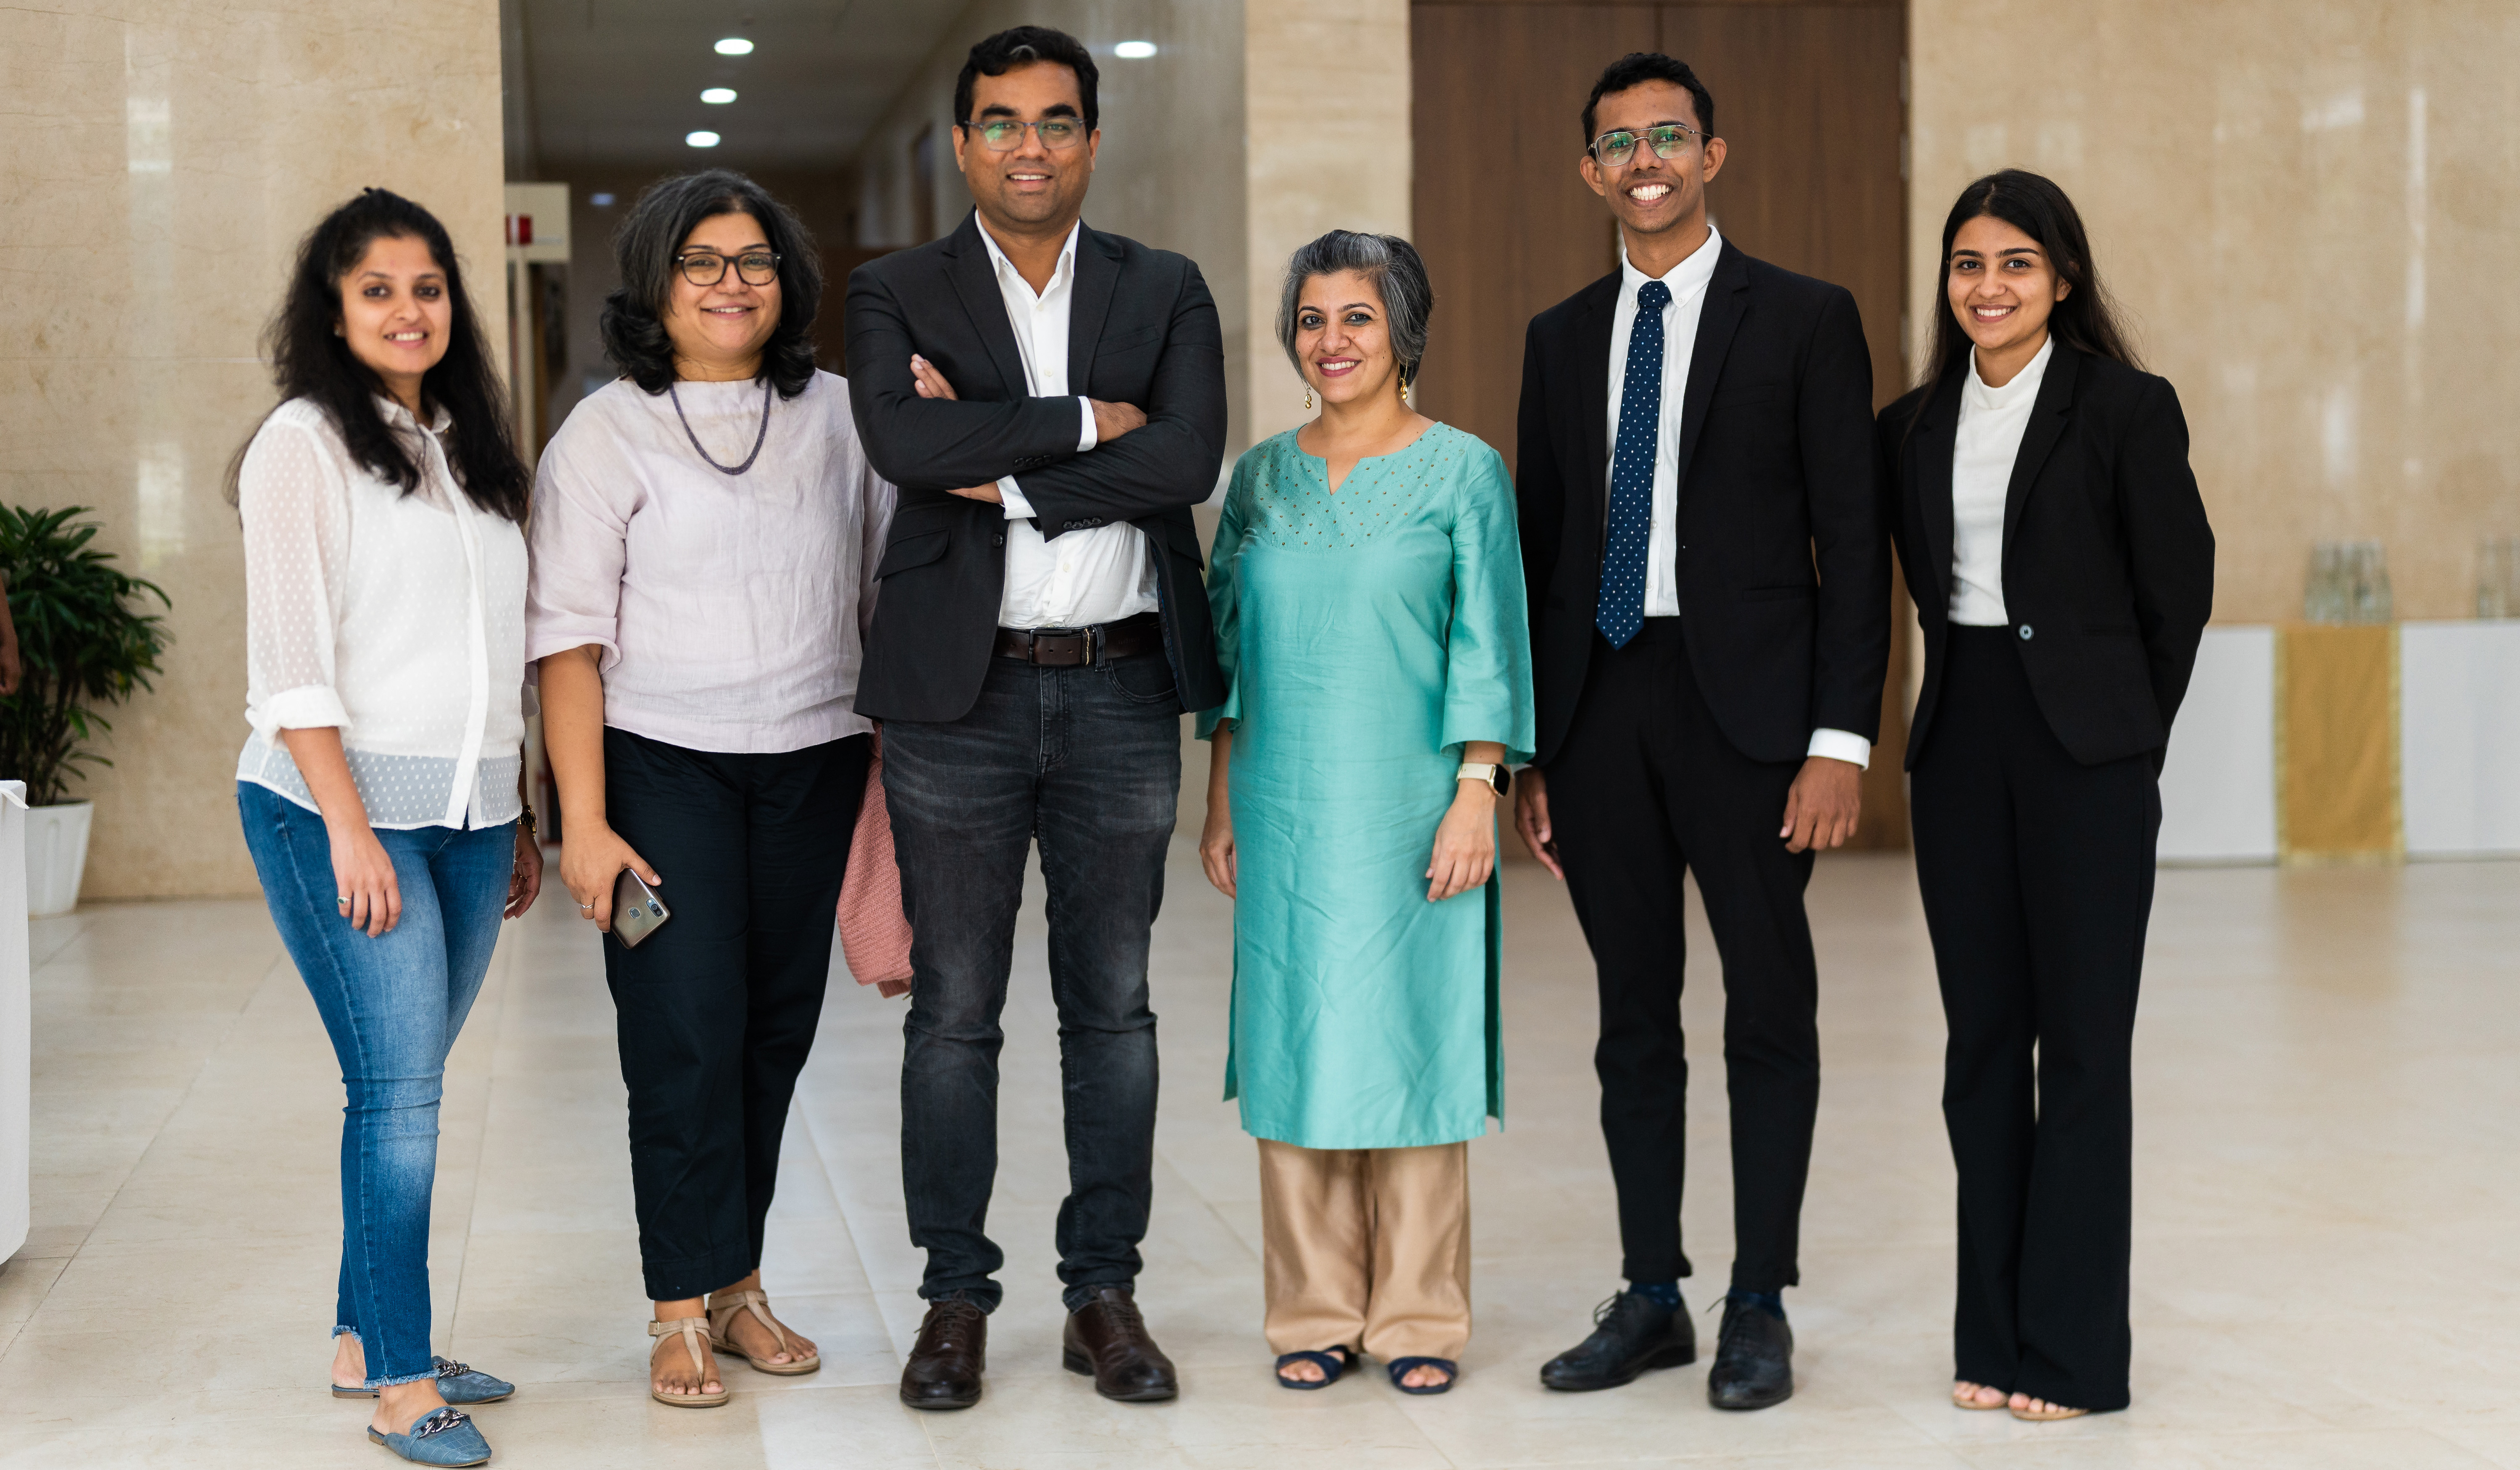 2022 Infosys Prize Laureate, Mahesh Kakde with the Infosys Science Foundation team